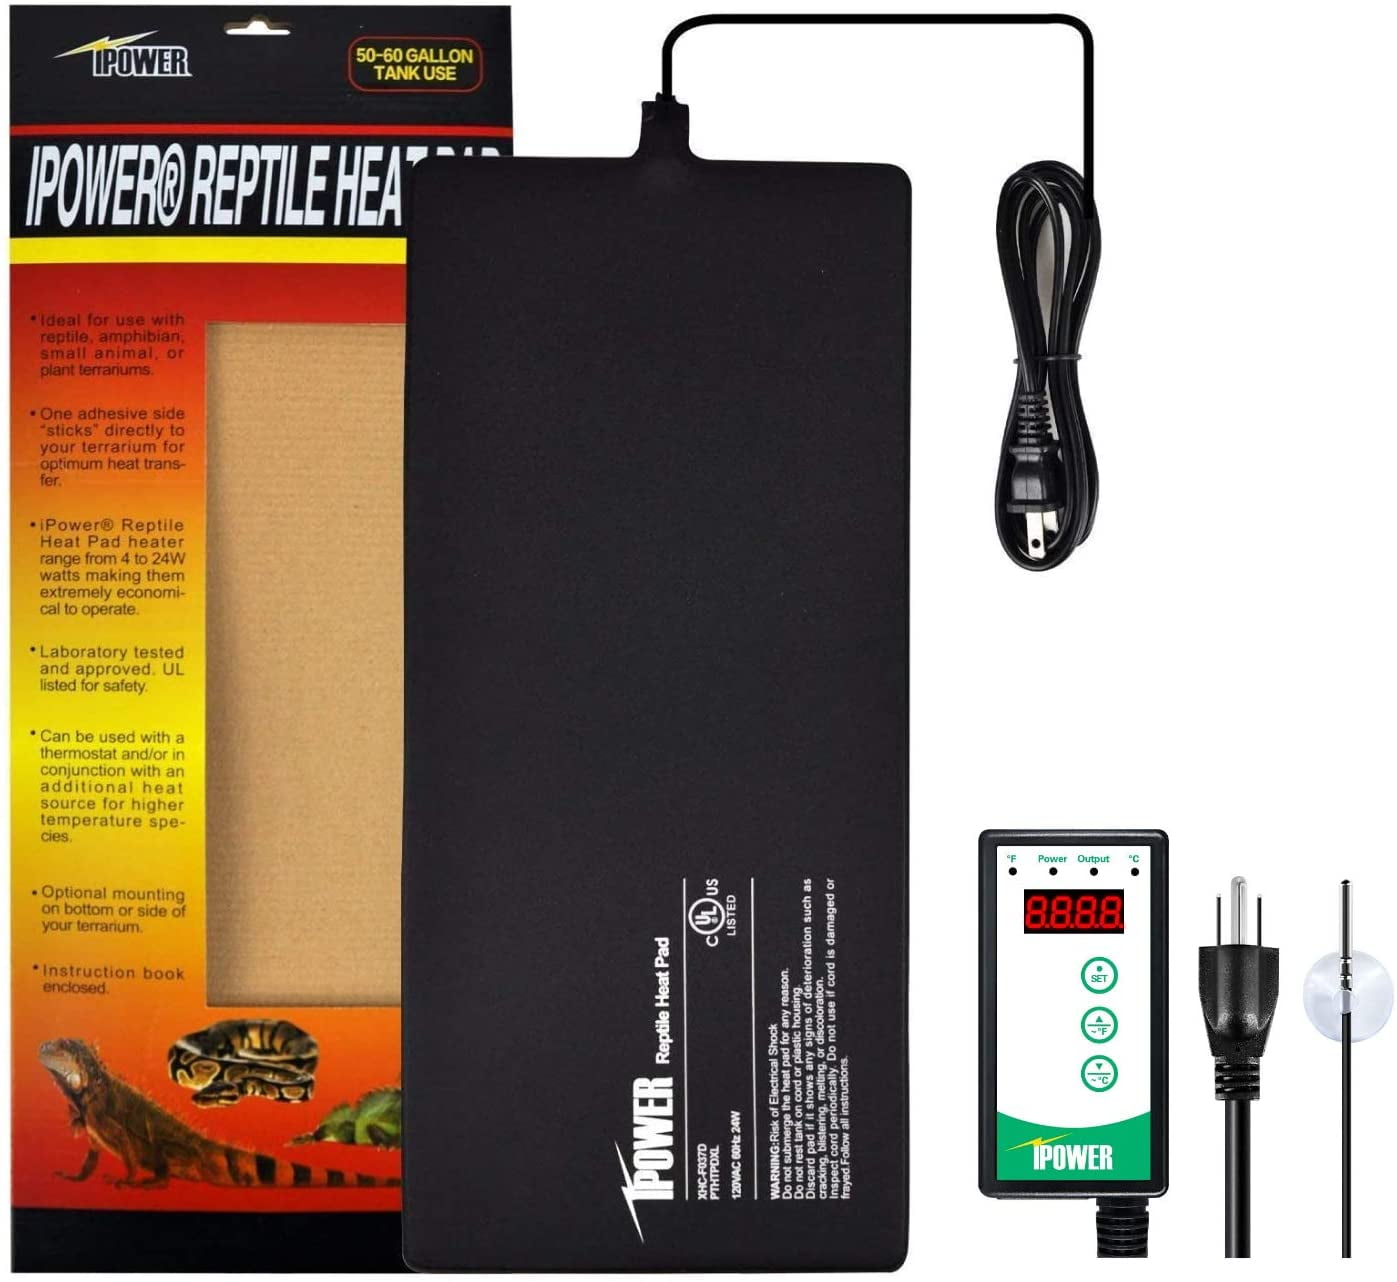 Multi Sizes iPower Reptile Heat Mat Under Tank Warmer 4W/8W/16W/24W Terrarium Heater Heating Pad with Temperature Adjustable Controller Knob Digital Thermometer and Hygrometerf or Amphibian 